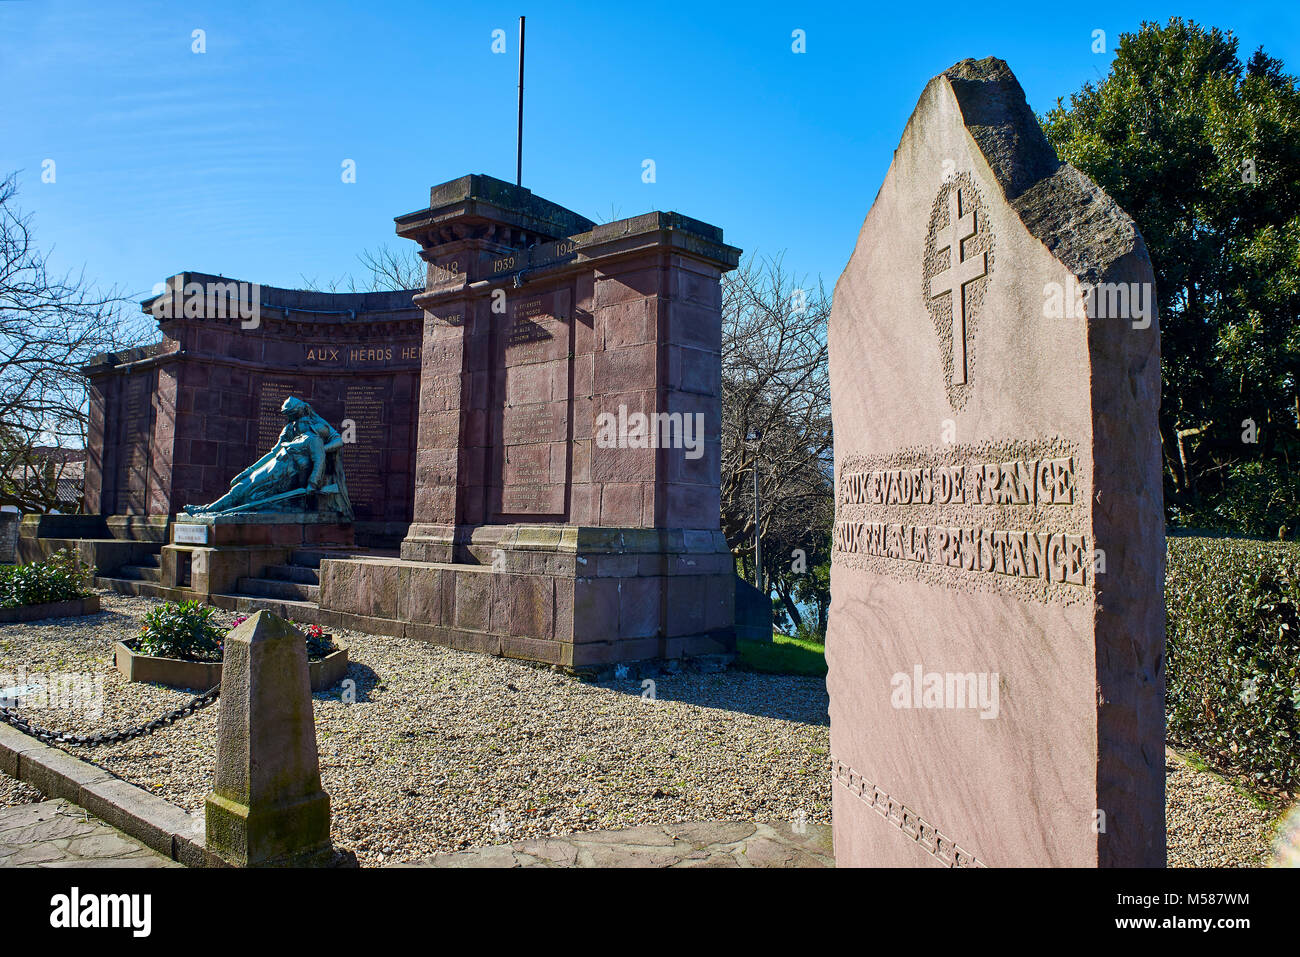 Hendaye, France - January 28, 2018. Cross of Lorraine headstone in honor of the escapees of France and to the Resistance with Memorial monument dedica Stock Photo